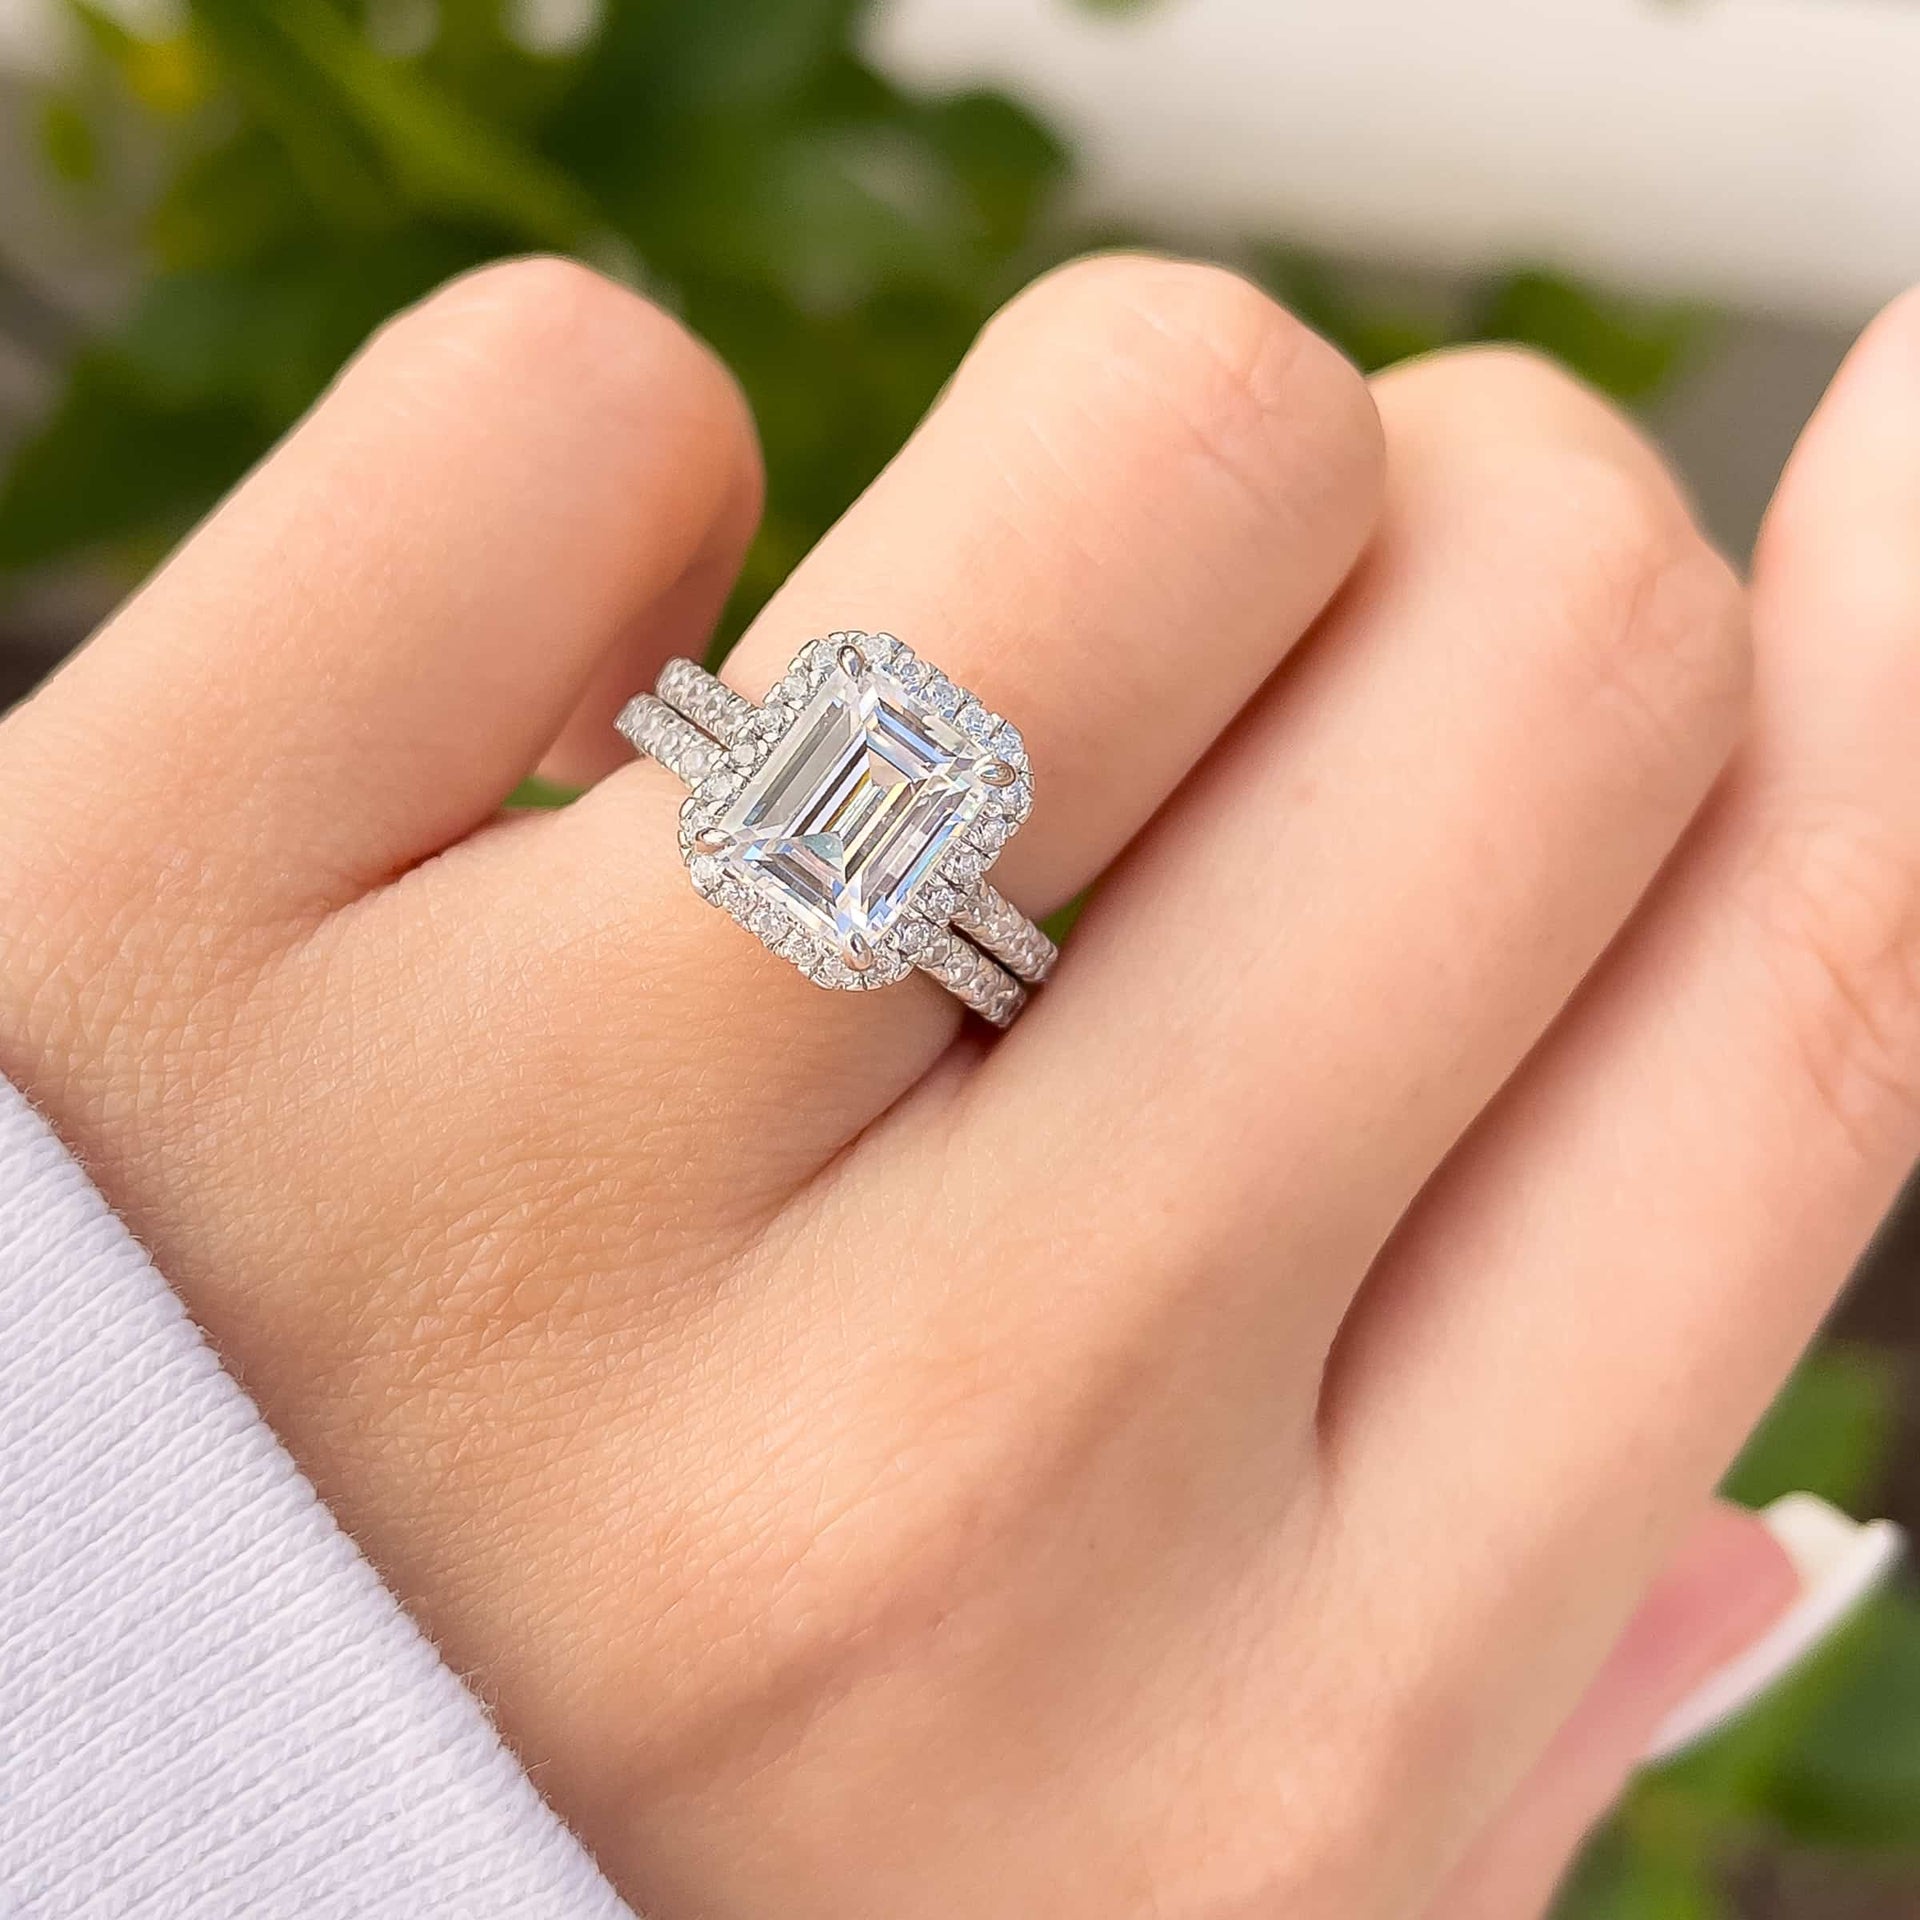 3 carat emerald cut engagement ring shown in silver paired with a stunning silver wedding band shown on model 